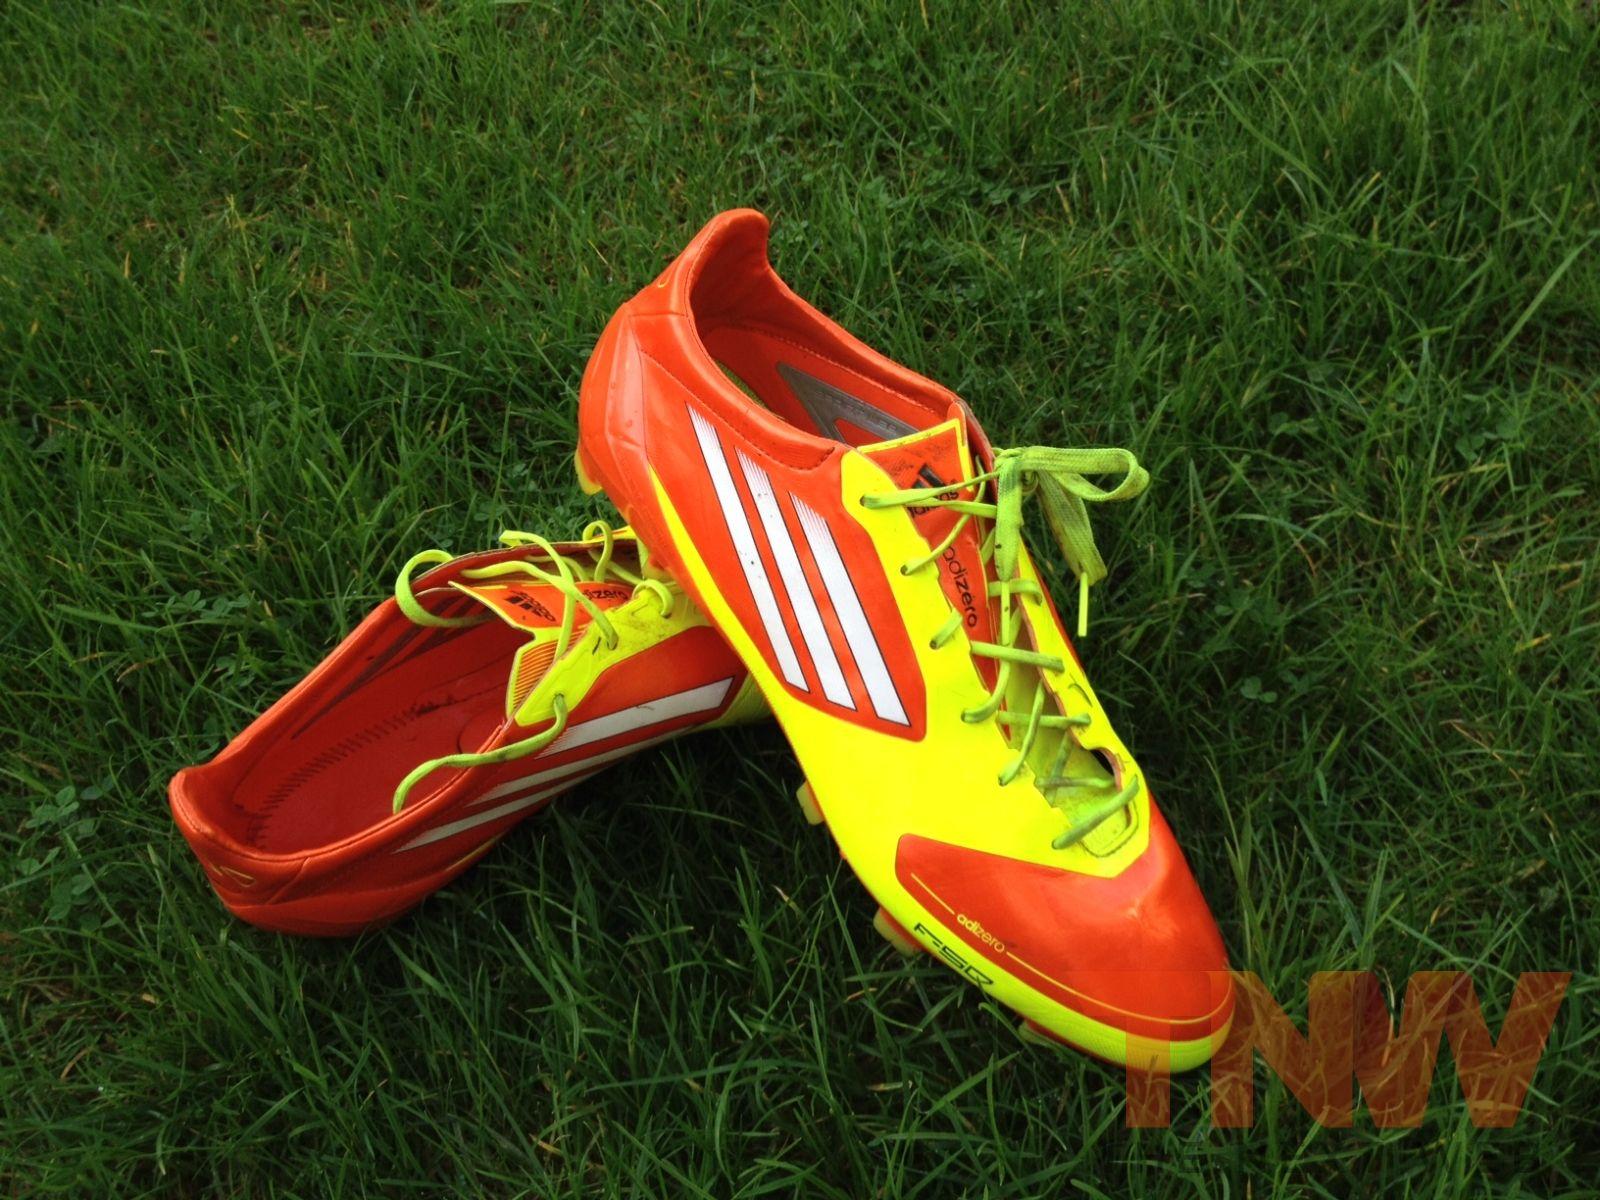 TNW Review: Adidas adizero F50 Boots and Speed_Cell